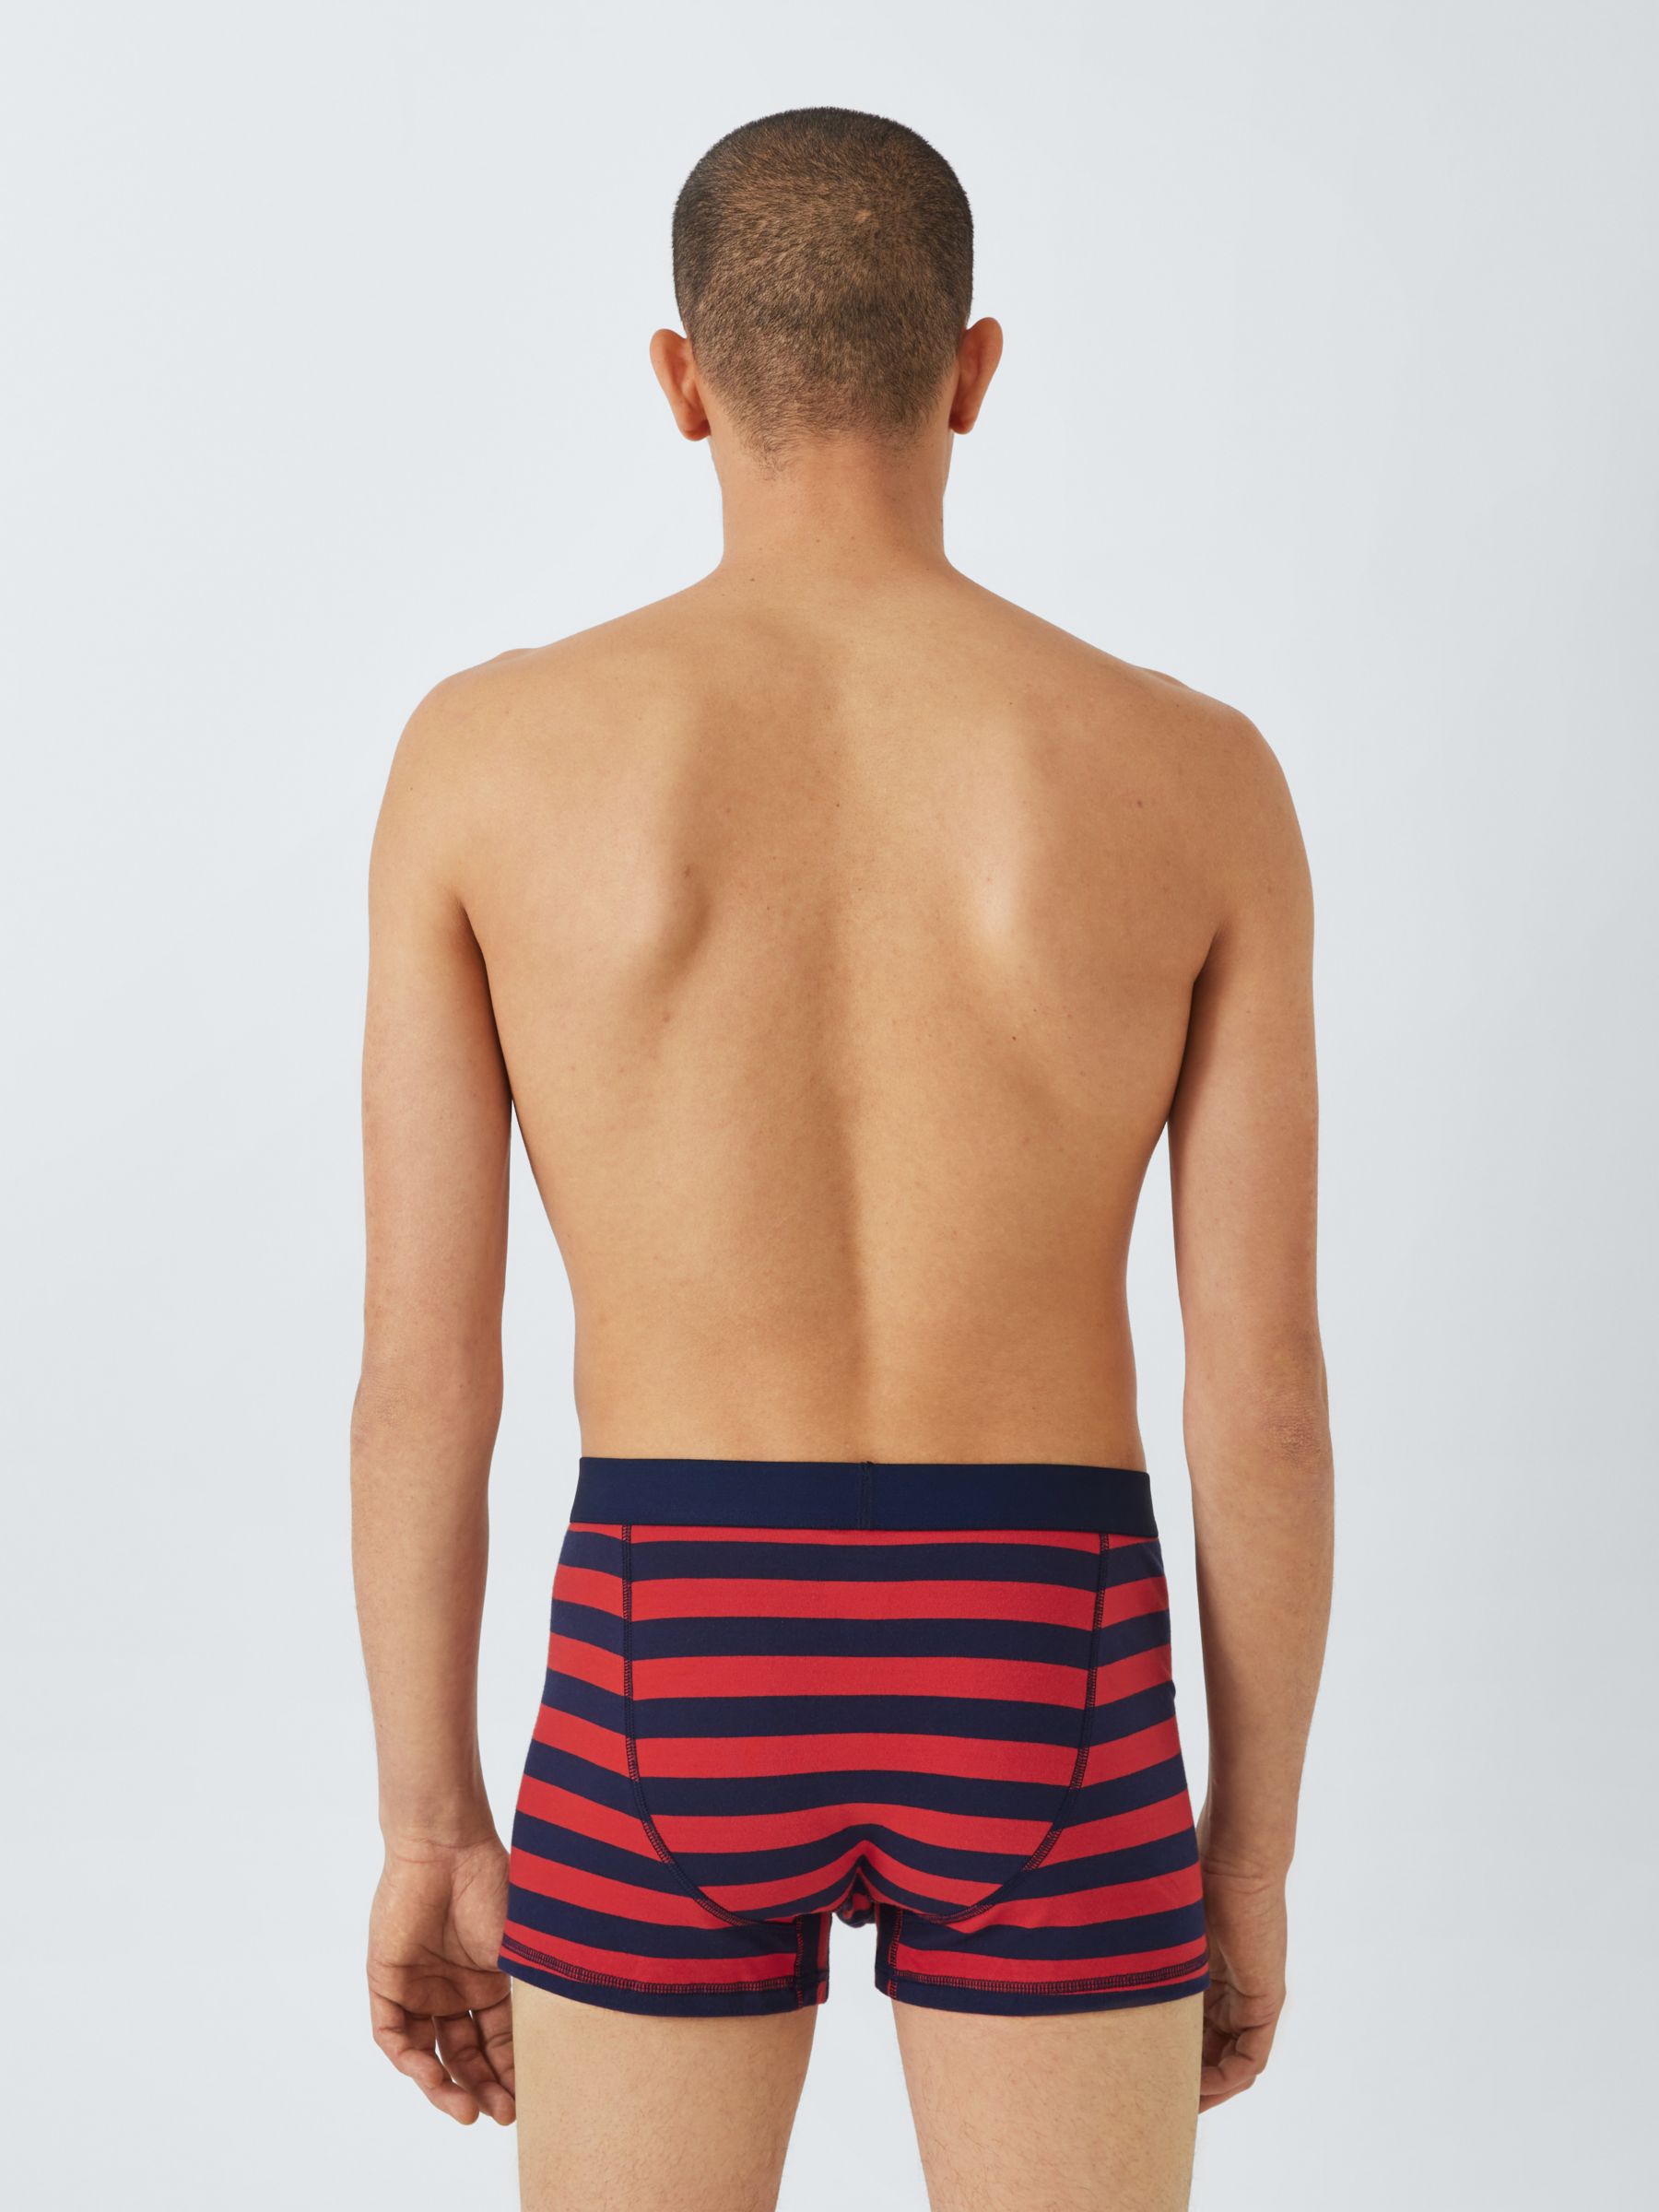 John Lewis ANYDAY Cotton Trunks, Pack of 5, Rugby Stripe, XL